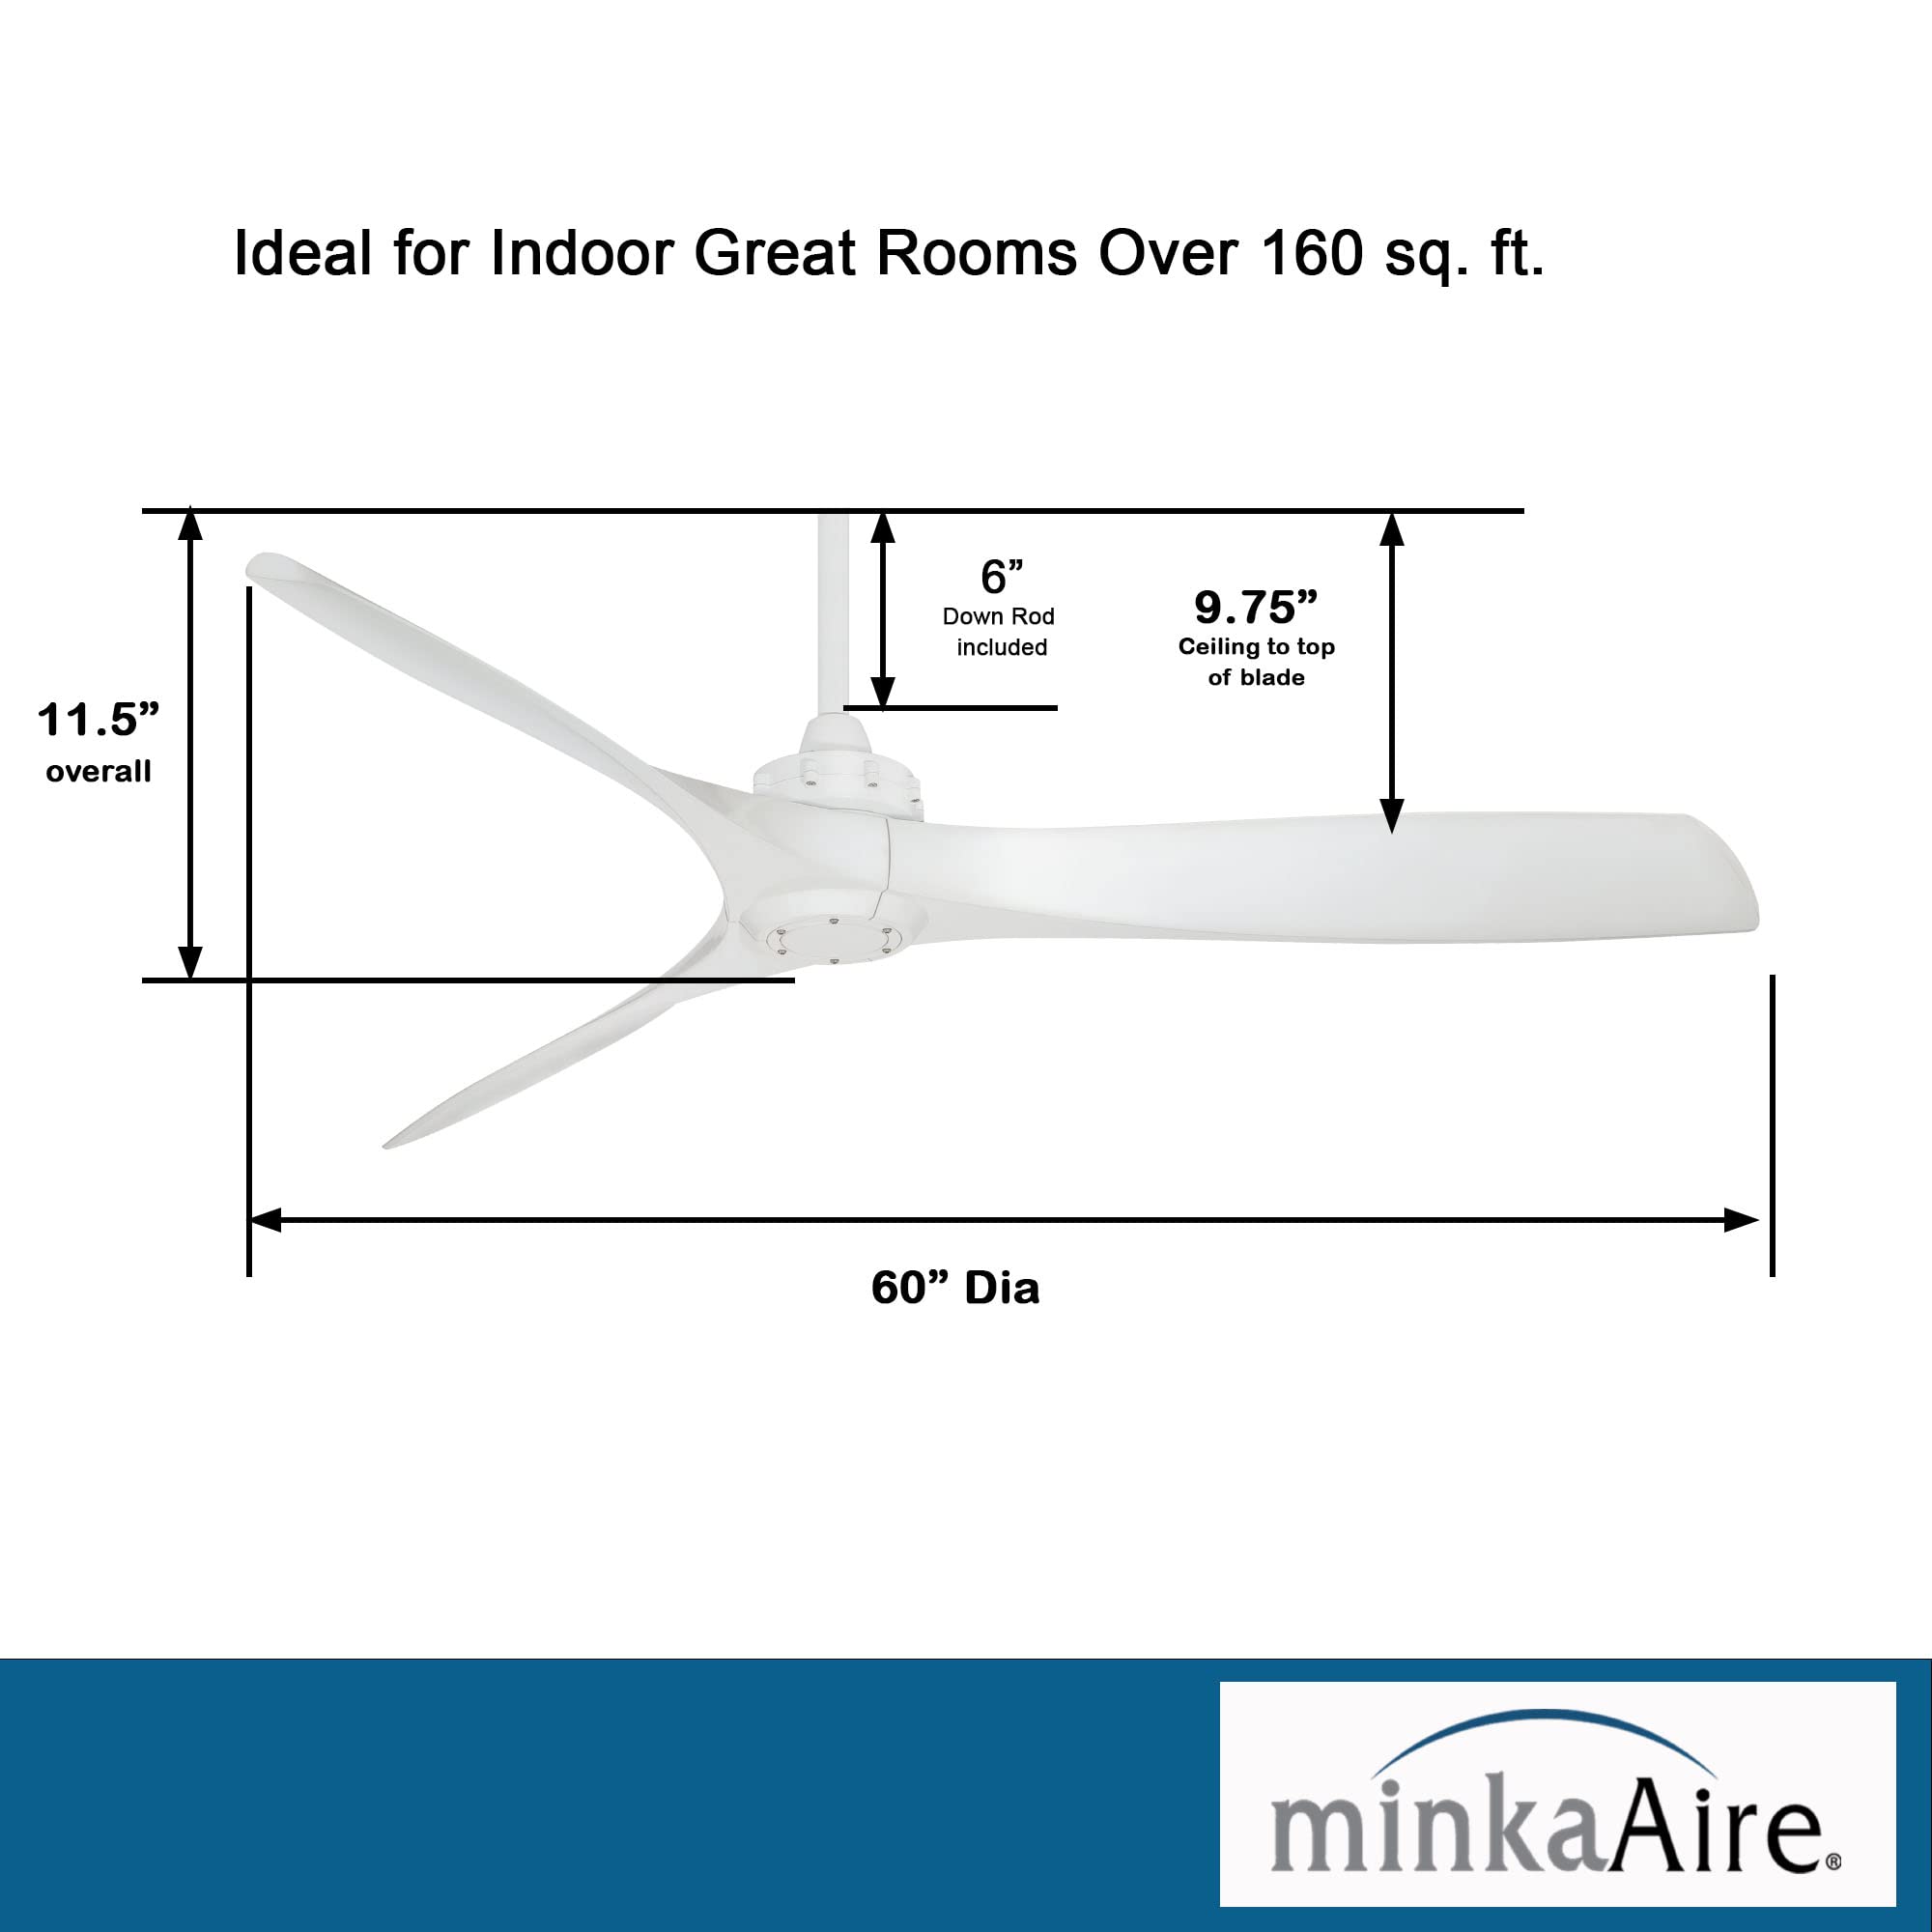 Minka-Aire F853-WH Aviation 60 Inch Ceiling Fan with DC Motor in White Finish